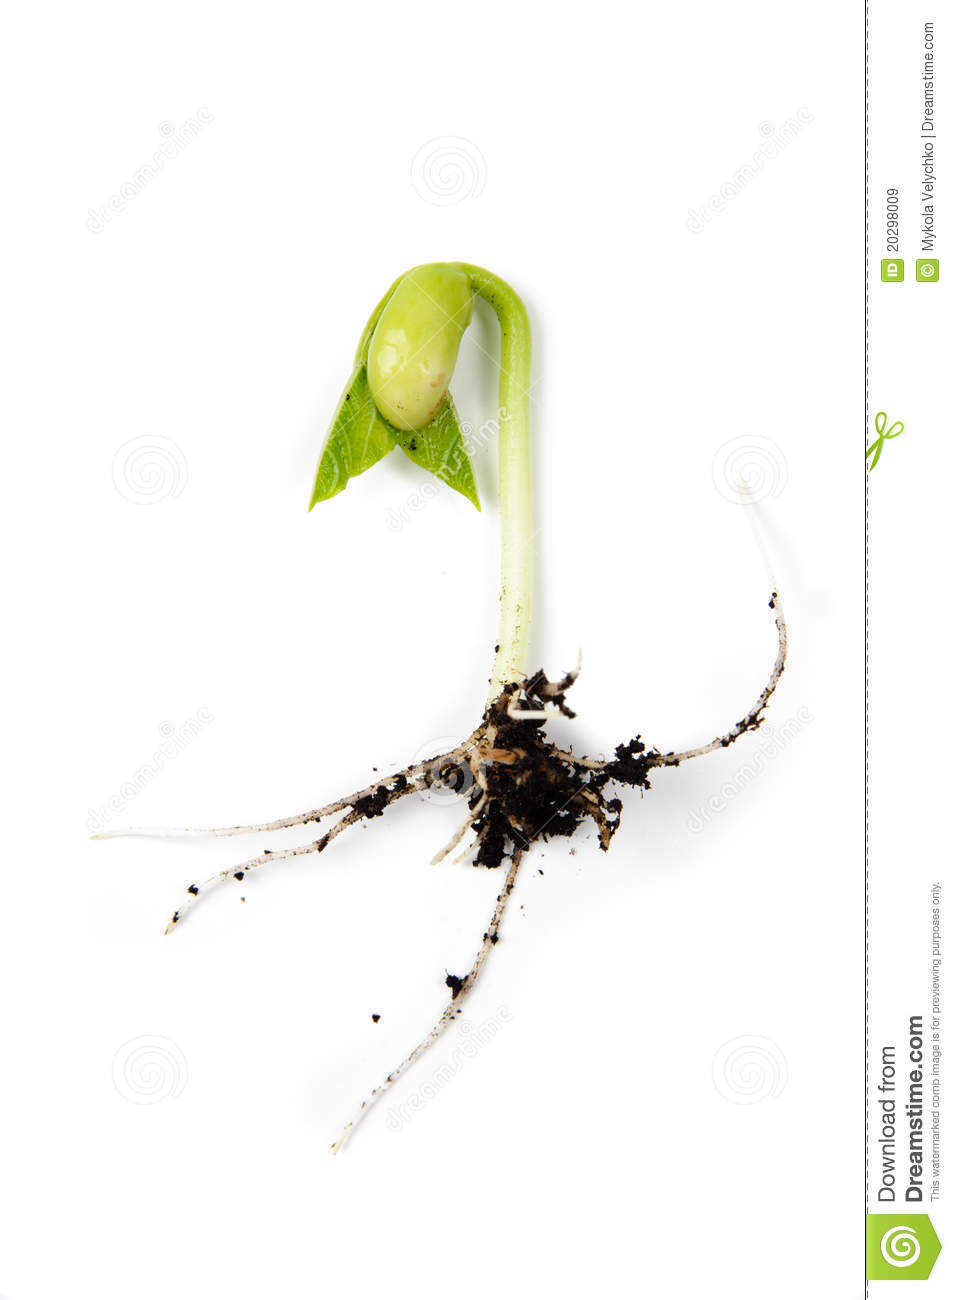 Bean Sprout Royalty Free Stock Images   Image  20298009